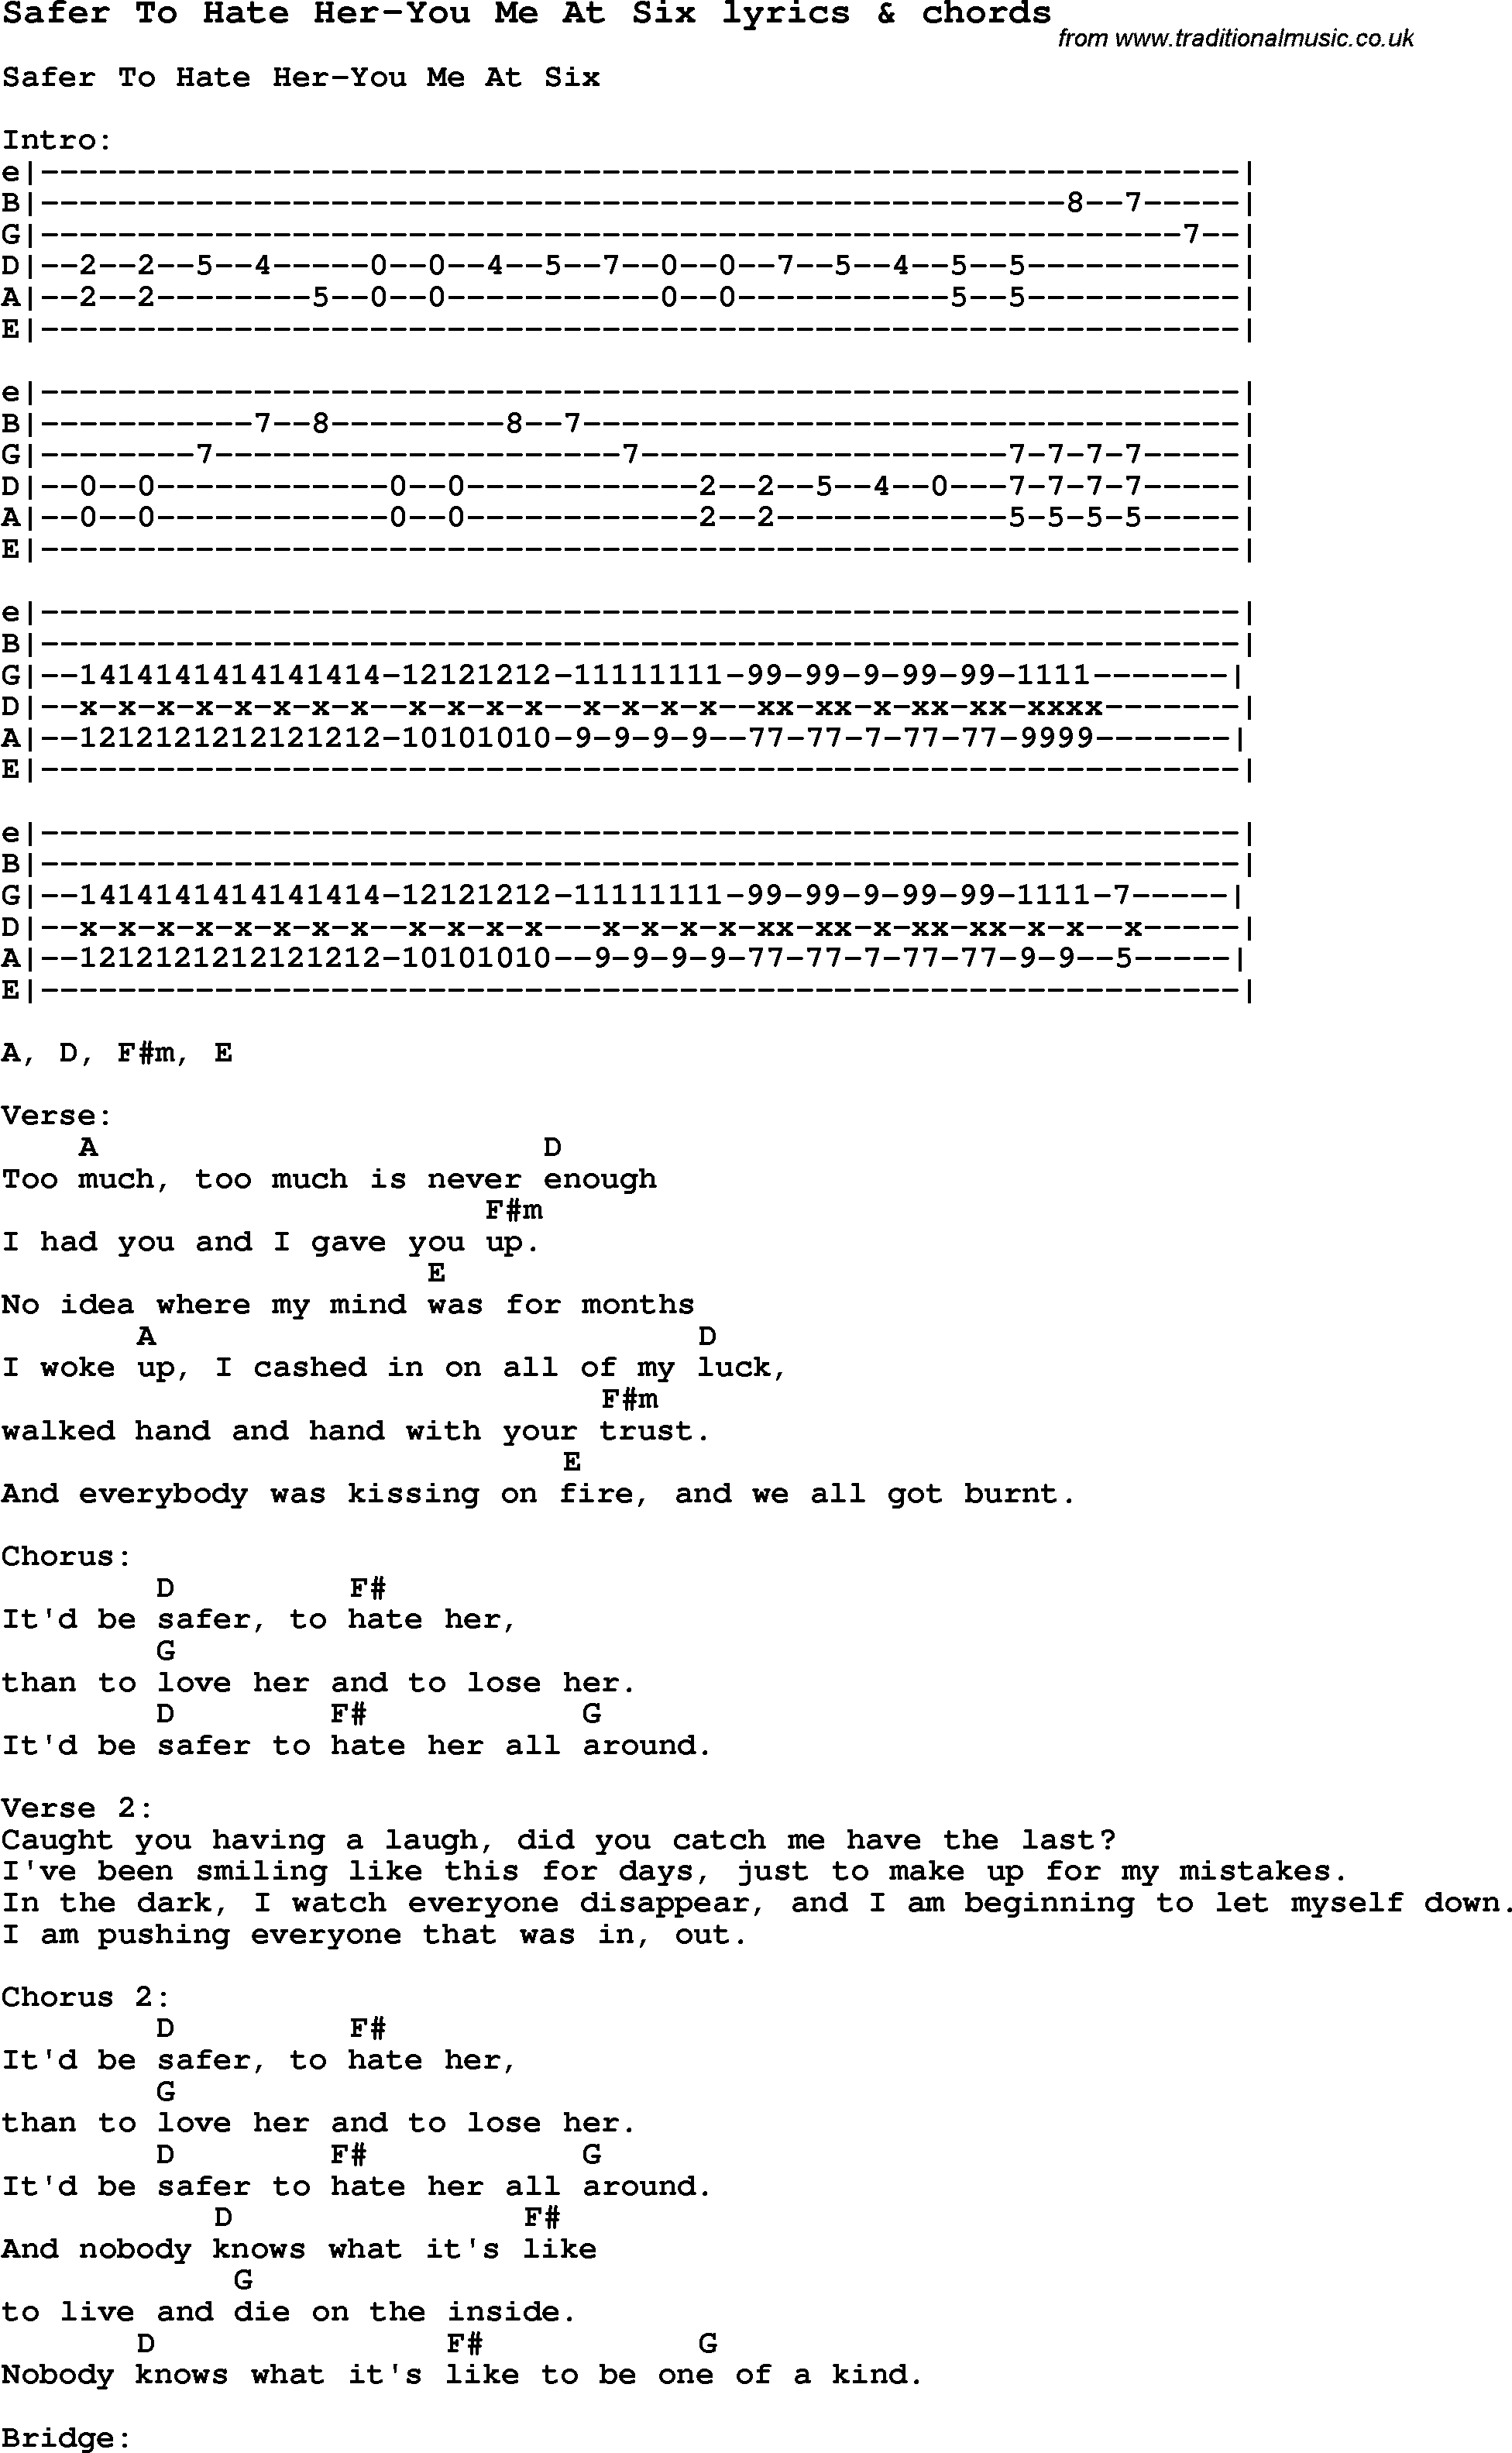 Love Song Lyrics for: Safer To Hate Her-You Me At Six with chords for Ukulele, Guitar Banjo etc.